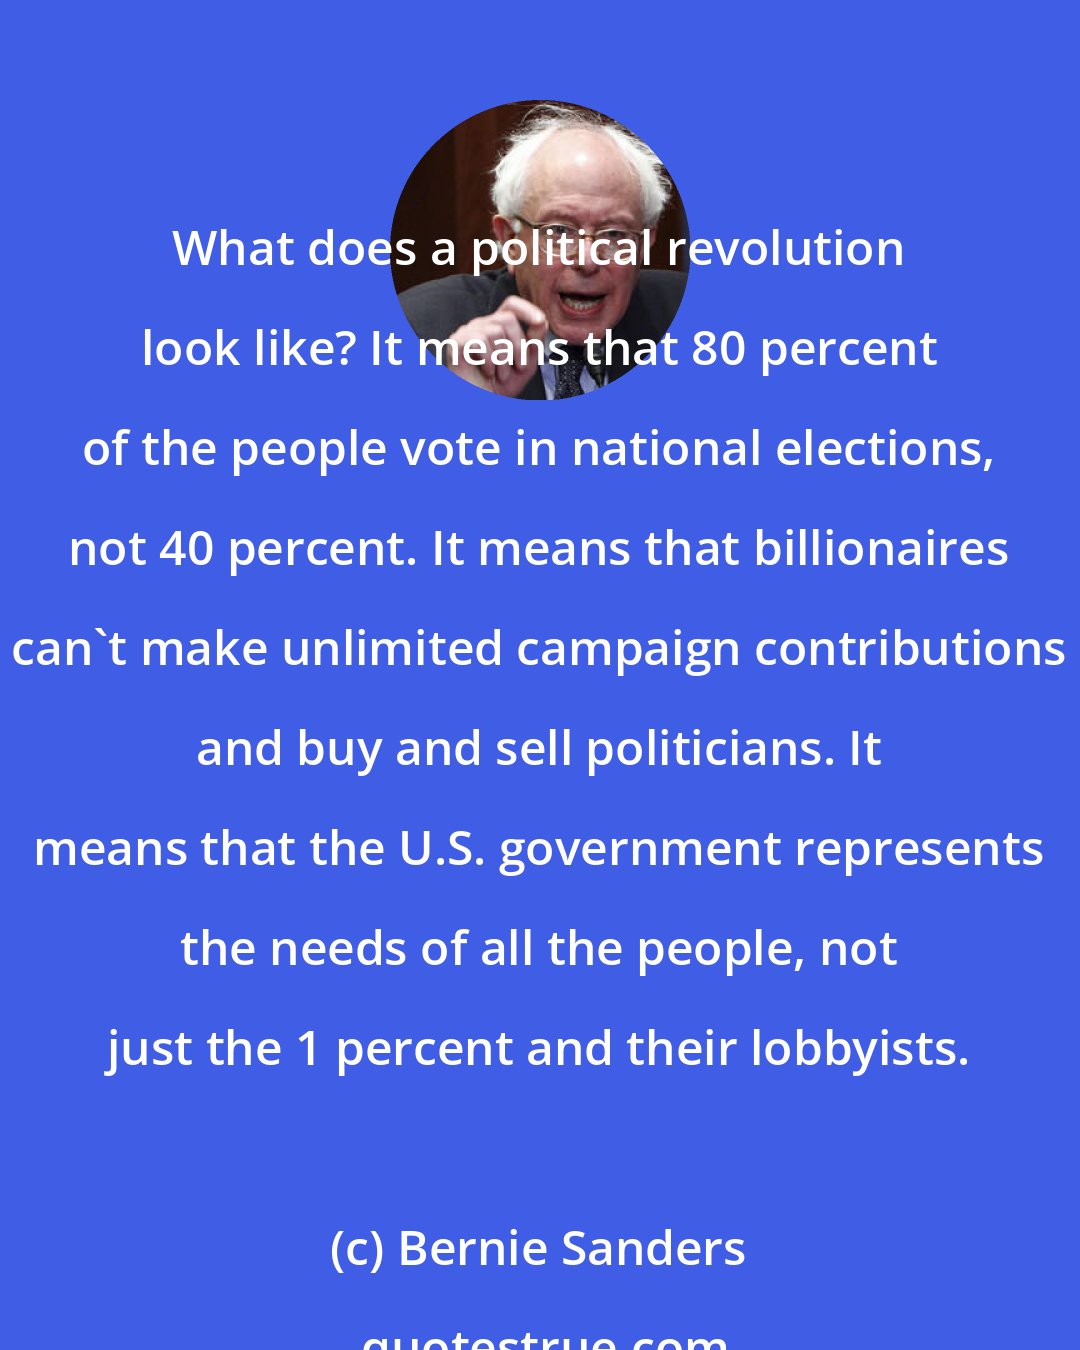 Bernie Sanders: What does a political revolution look like? It means that 80 percent of the people vote in national elections, not 40 percent. It means that billionaires can't make unlimited campaign contributions and buy and sell politicians. It means that the U.S. government represents the needs of all the people, not just the 1 percent and their lobbyists.